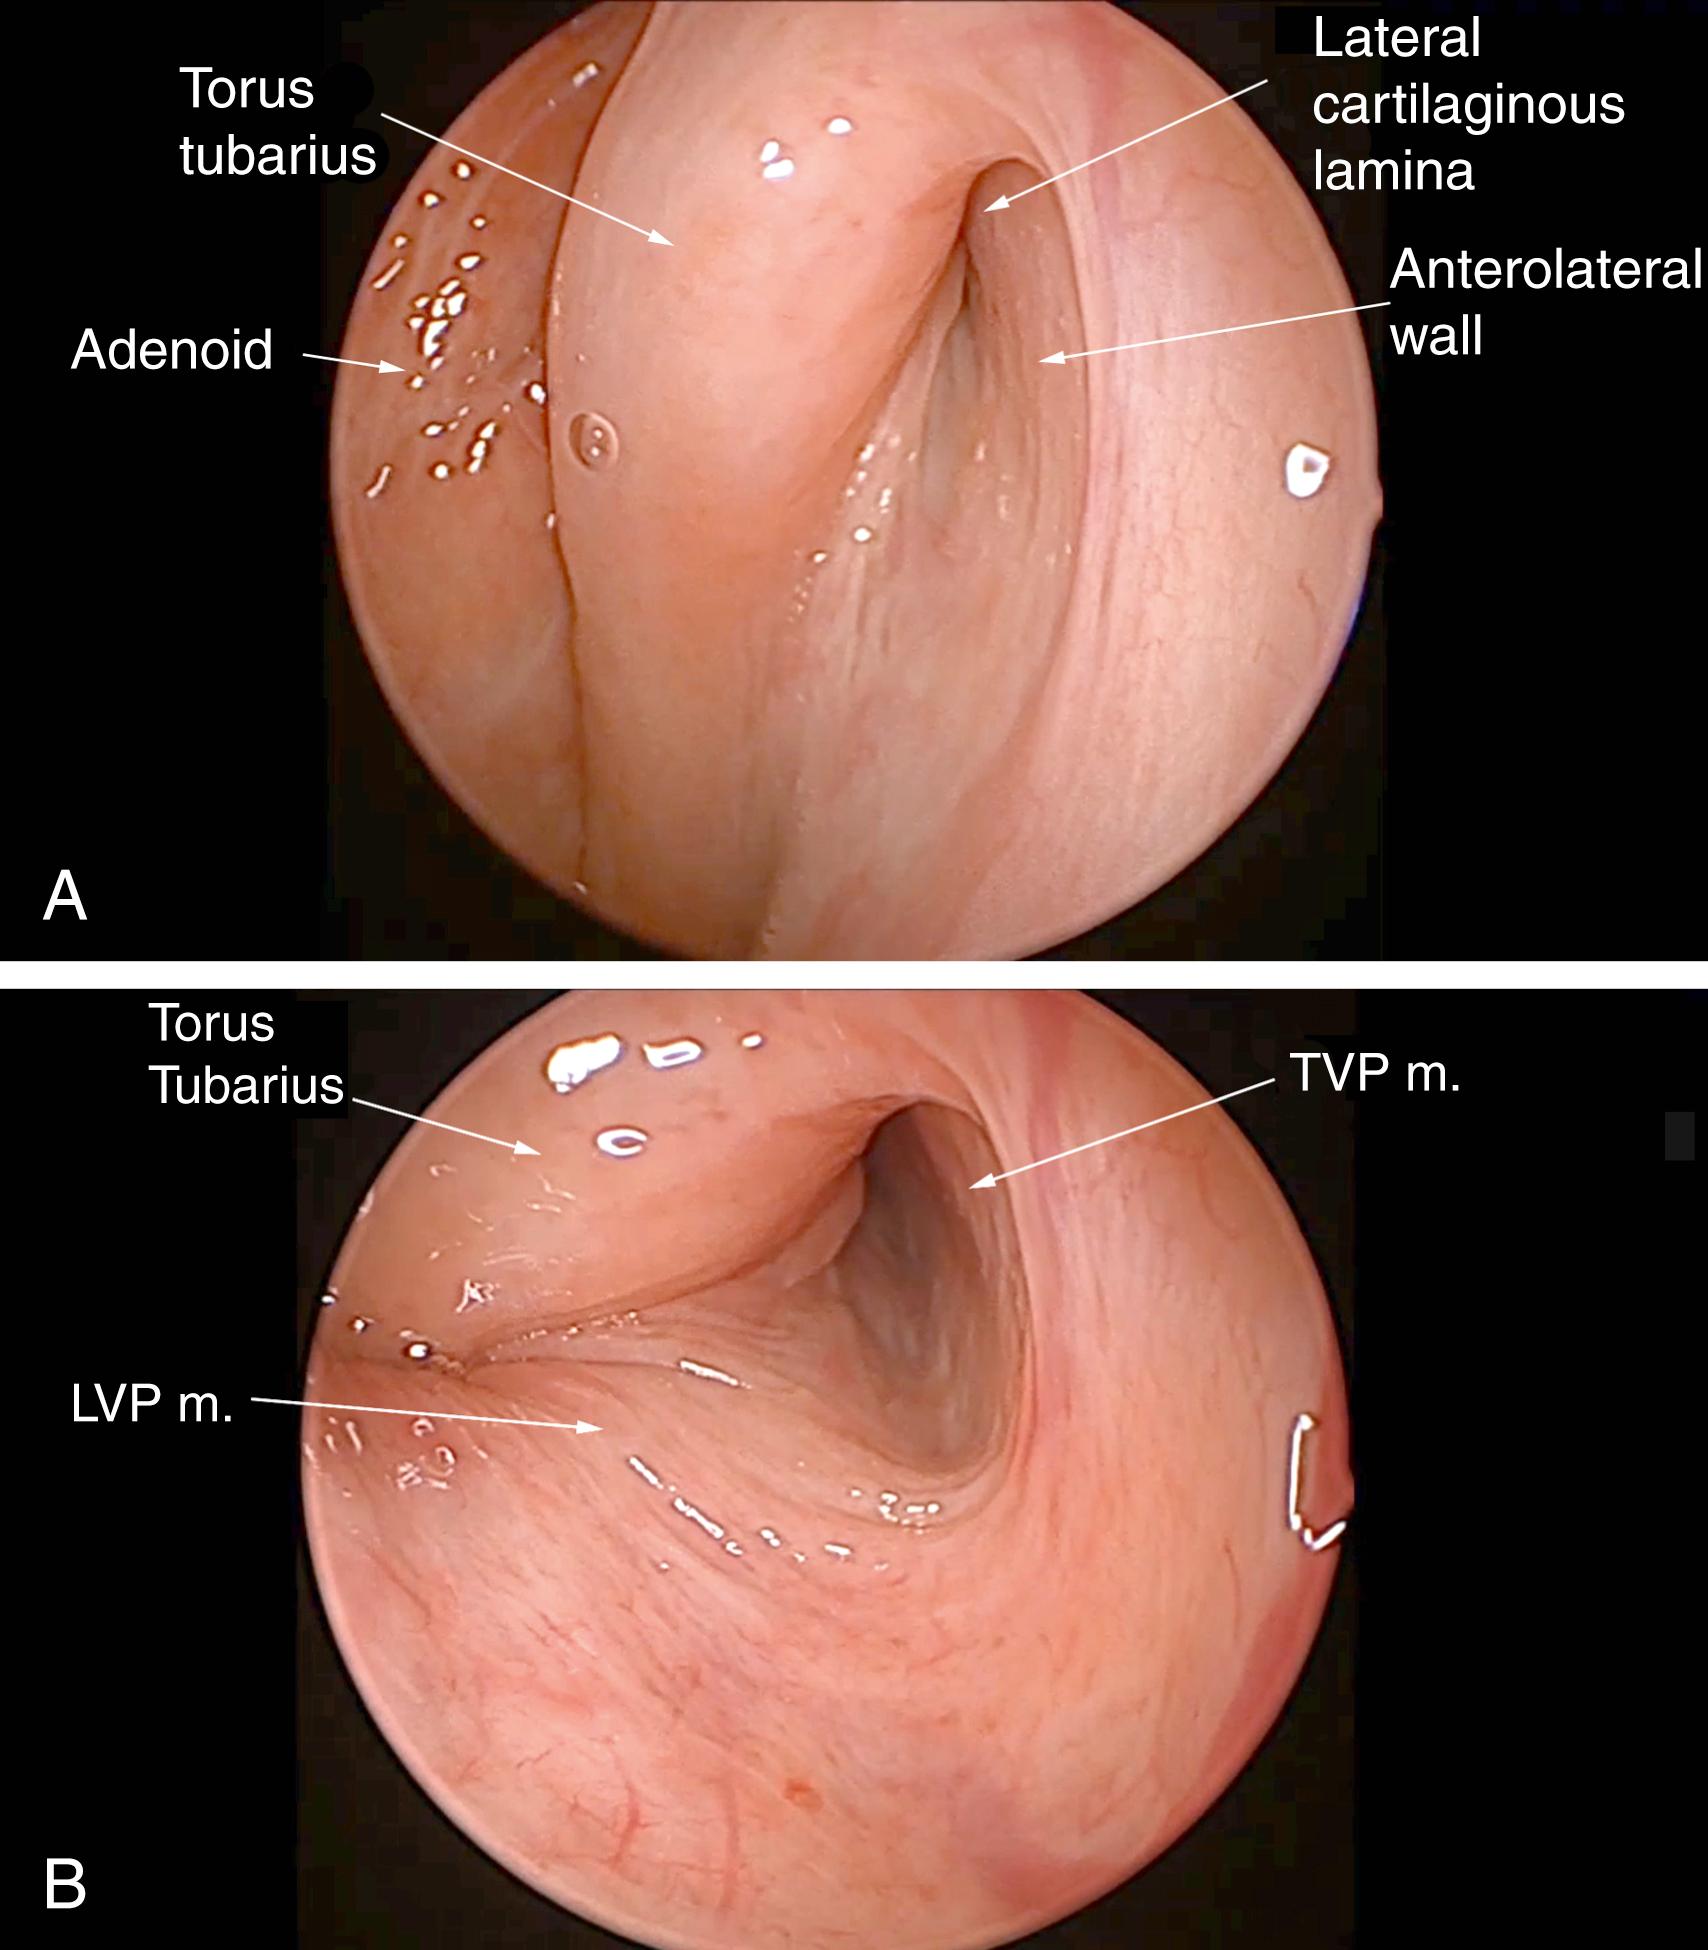 Fig. 6.1, Normal eustachian tube (left) in a 45-degree, 3-mm diameter endoscopic view. The patient is seated in the office. (A) Resting position: the functional valve is closed (the mucosal surfaces of the anterolateral wall and the posteromedial walls meet with no visible gaps). Note that the mucosa appears non-inflamed, thin, with visible vasculature, absence of significant cobblestoning (lymphoid follicle- adenoid-like tissue), and minimal mucus. Although the orifice is relatively widely open, the walls of the valve within the lumen meet completely and the closure of the valve is competent. (B) The open position (with swallowing, yawning, or vocalizing “Ah”). The levator veli palatine ( LVP ) muscle and palate in the floor of the lumen are elevated and rotate the torus tubarius medially as a scaffold against which the tensor veli palatine ( TVP ) muscle pulls the anterolateral wall laterally to open the valve.